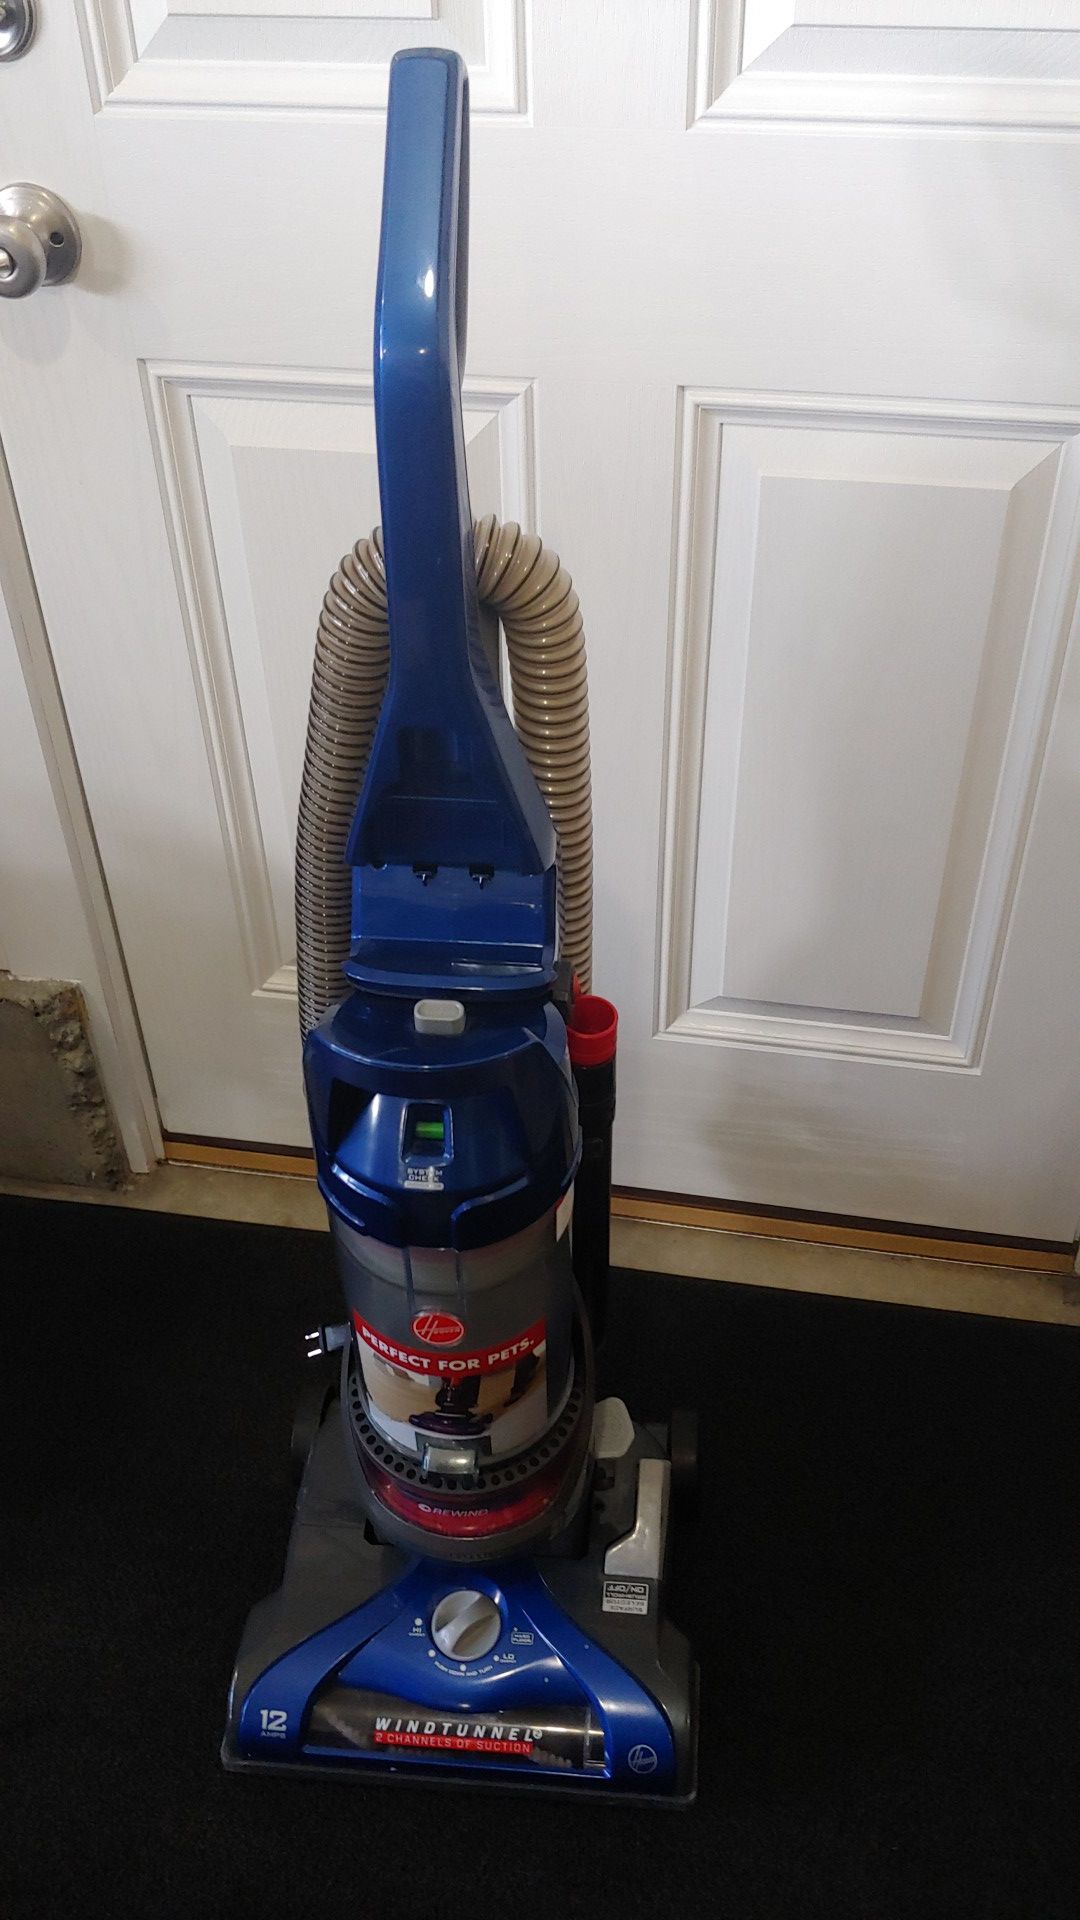 Like new condition wind tunnel Hoover vacuum